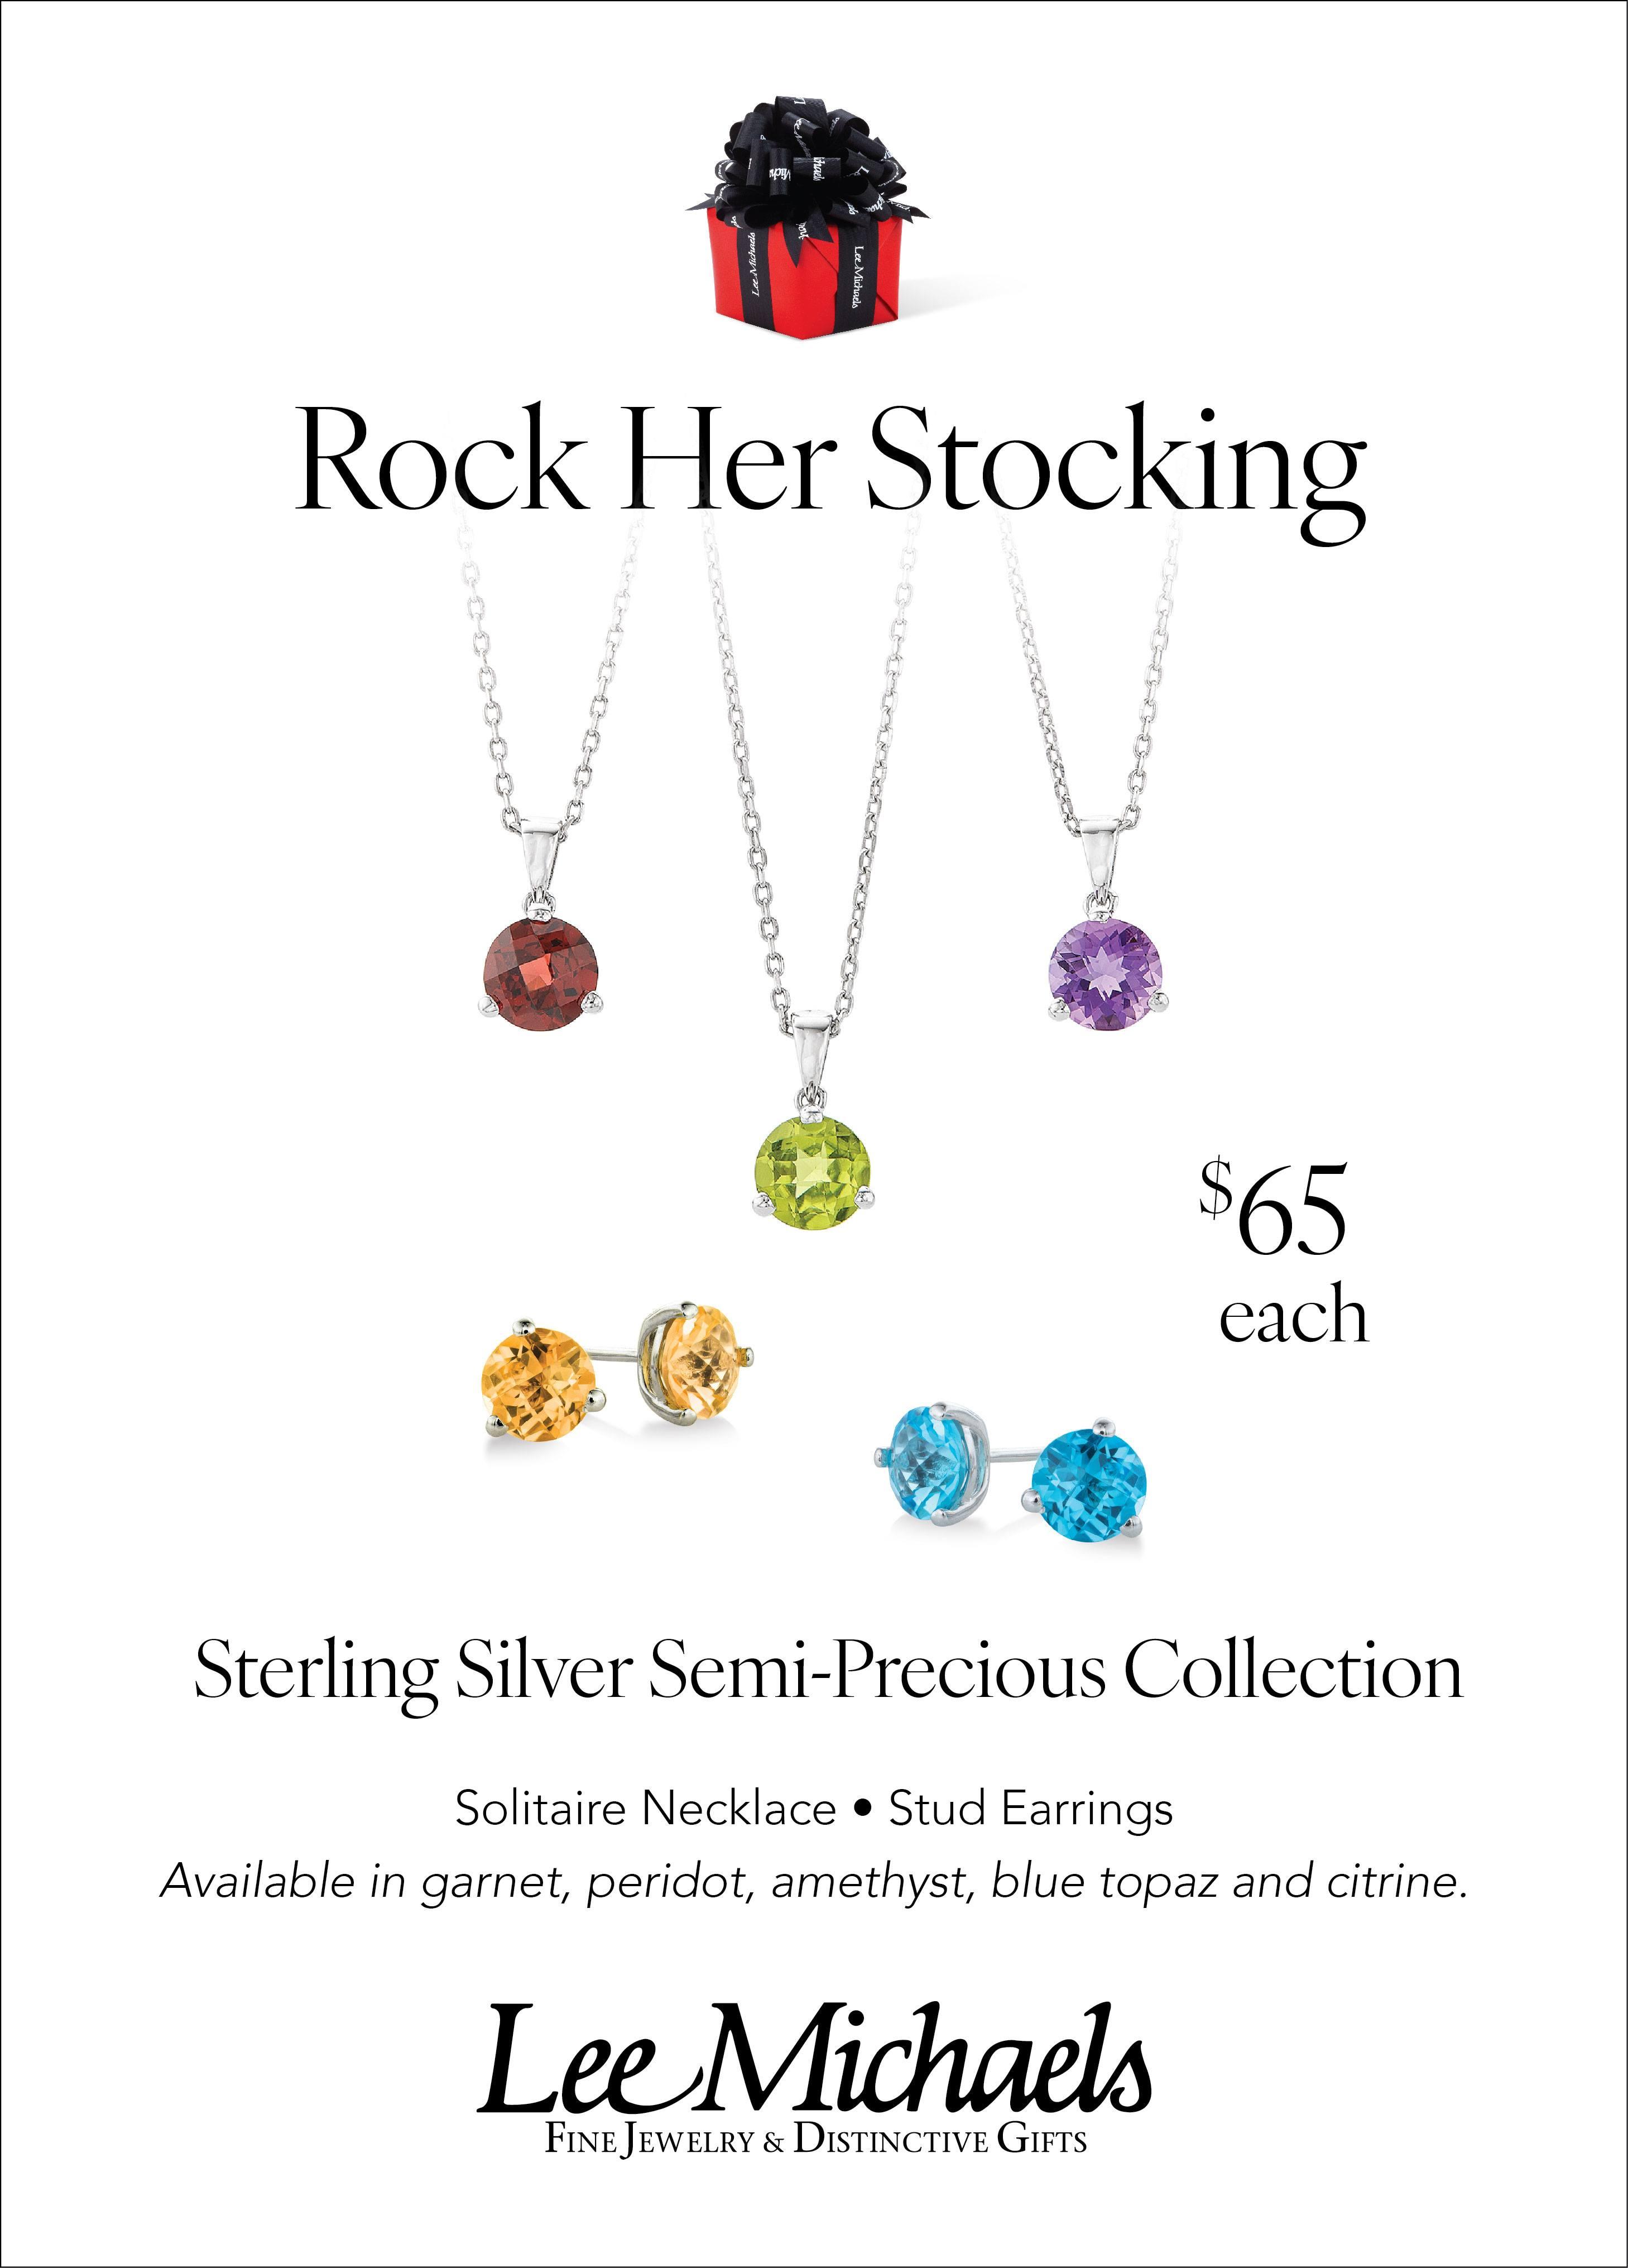 Advertised Semi-Precious Stone Collection, Holiday 2023